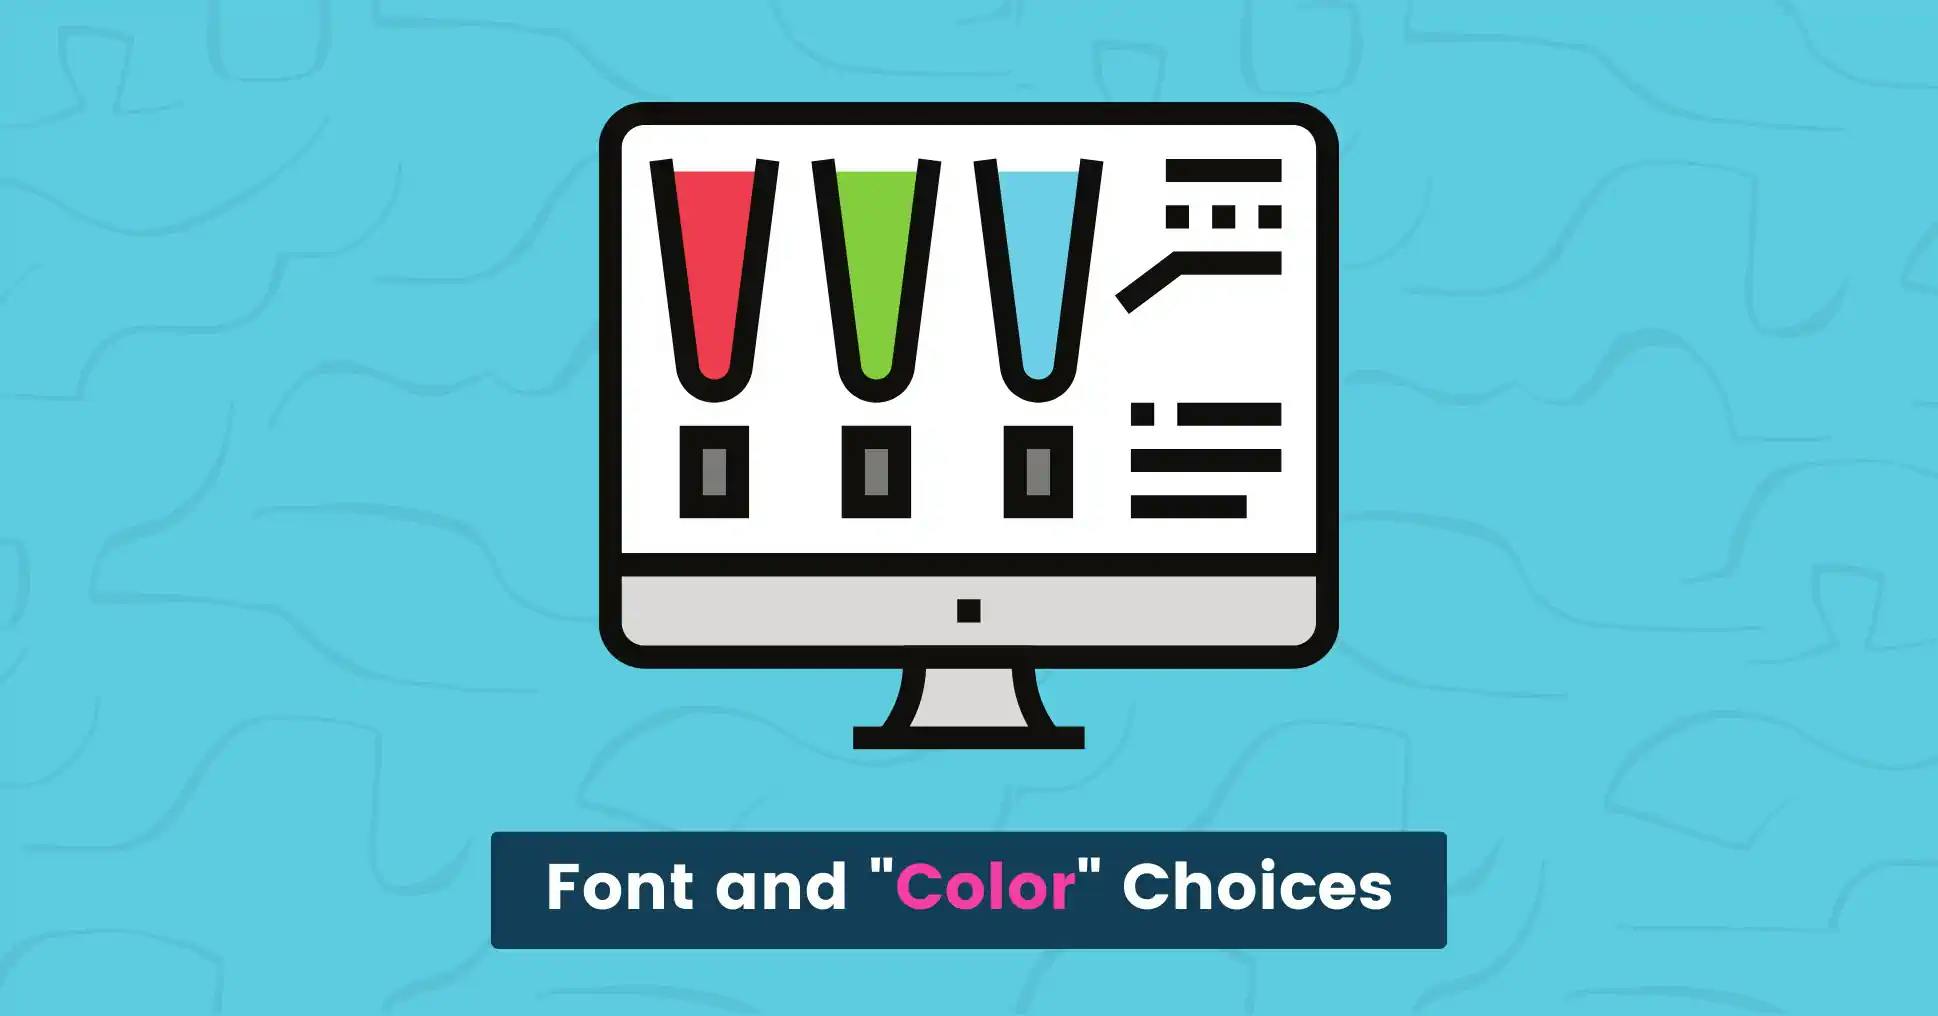 Font and colors choices in slides